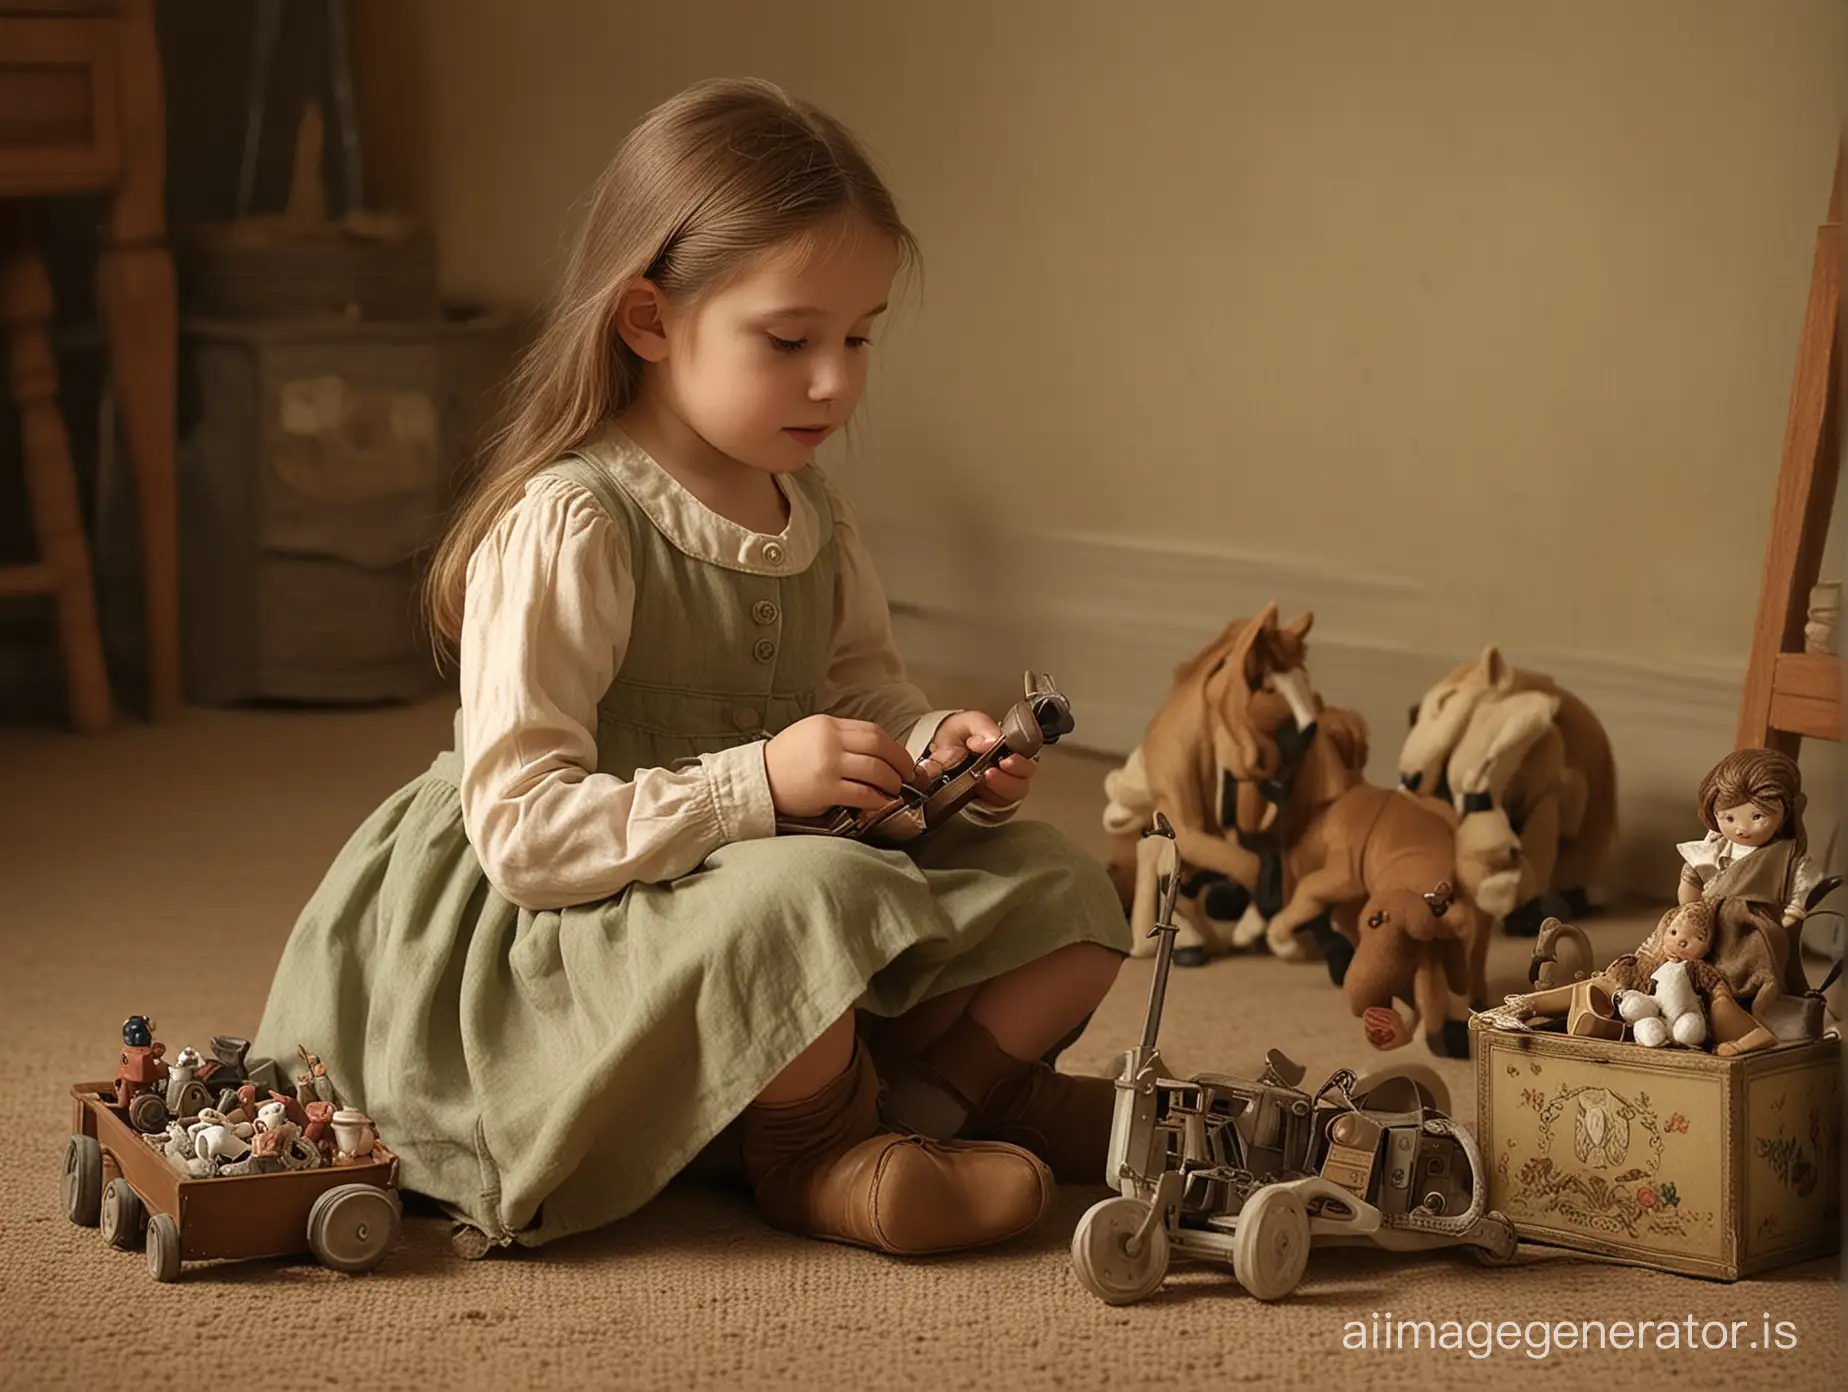 A girl, about 6 years old, sitting on the ground, captured in profile, is busy playing with old dusty toys, including dolls, music boxes, puppets, and rocking horses. She is holding a music box. Style: Detailed Photorealistic, Nostalgic and melancholic atmosphere, Warm and soft, dim light. Soft and diffused shadows prevail. Predominantly muted and dusty colors, such as brown, beige, and sage green. Warm and welcoming atmosphere.